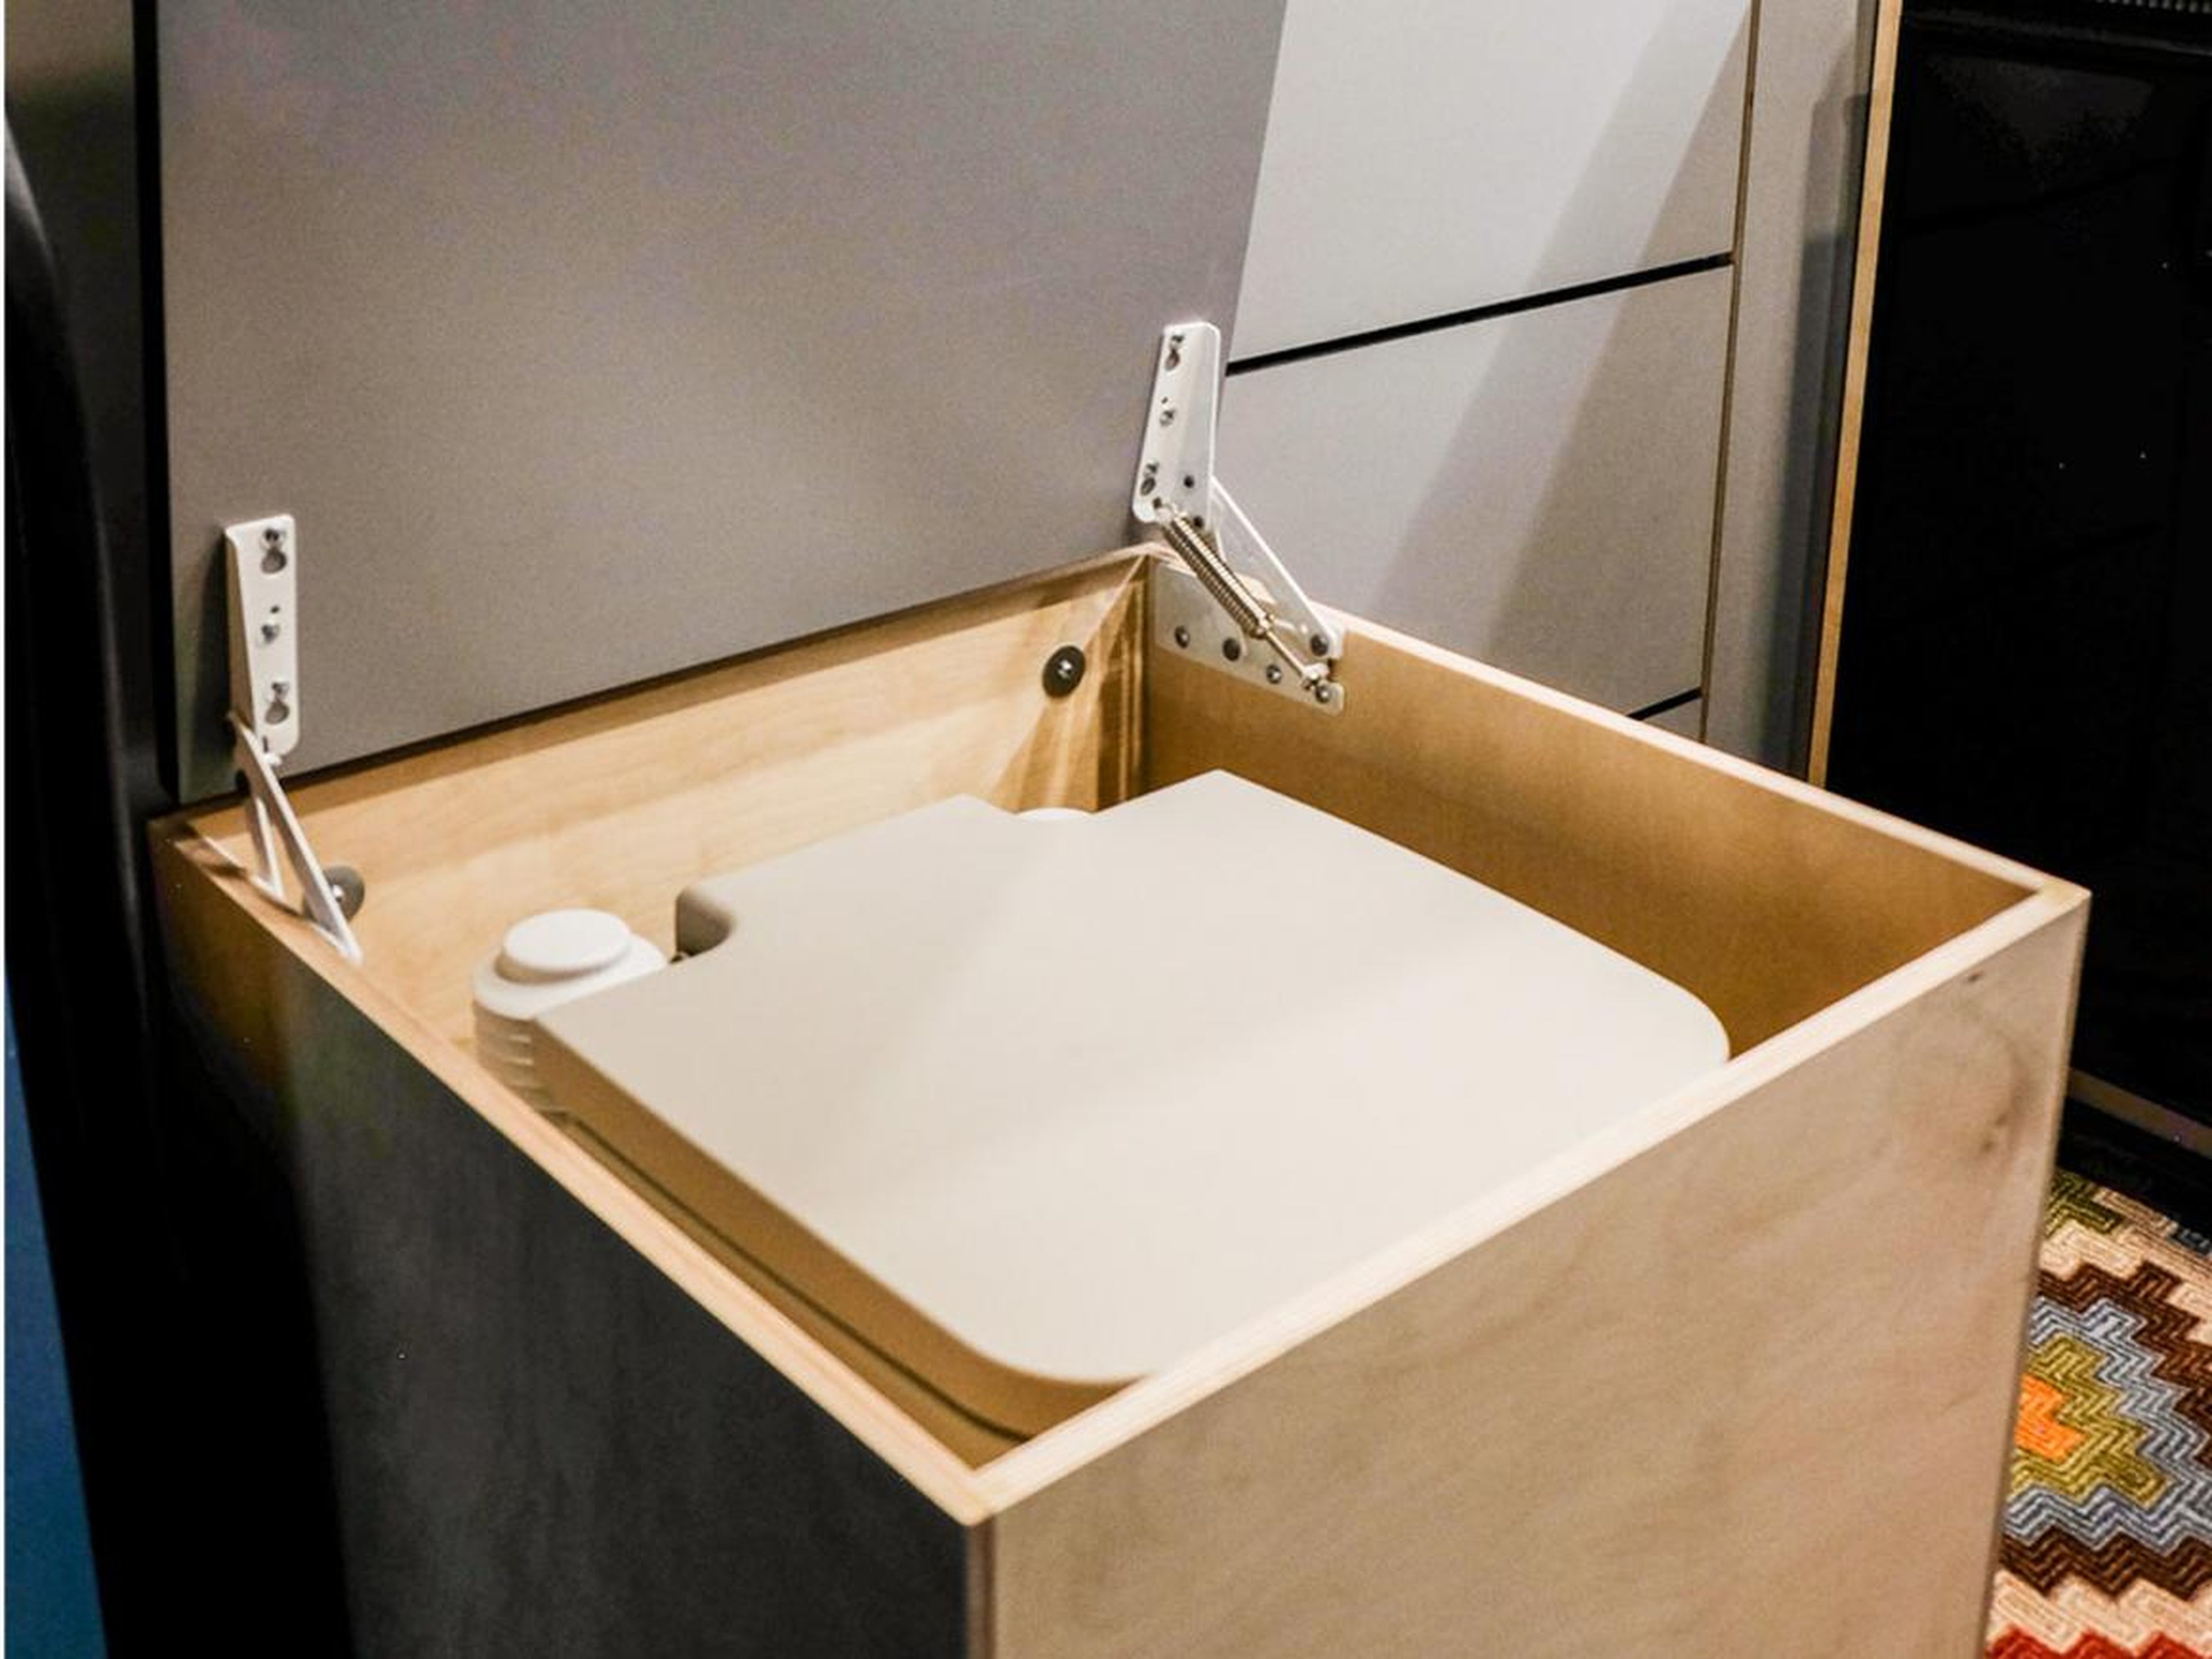 The storage bench that hides the cassette toilet doubles as a seating unit.